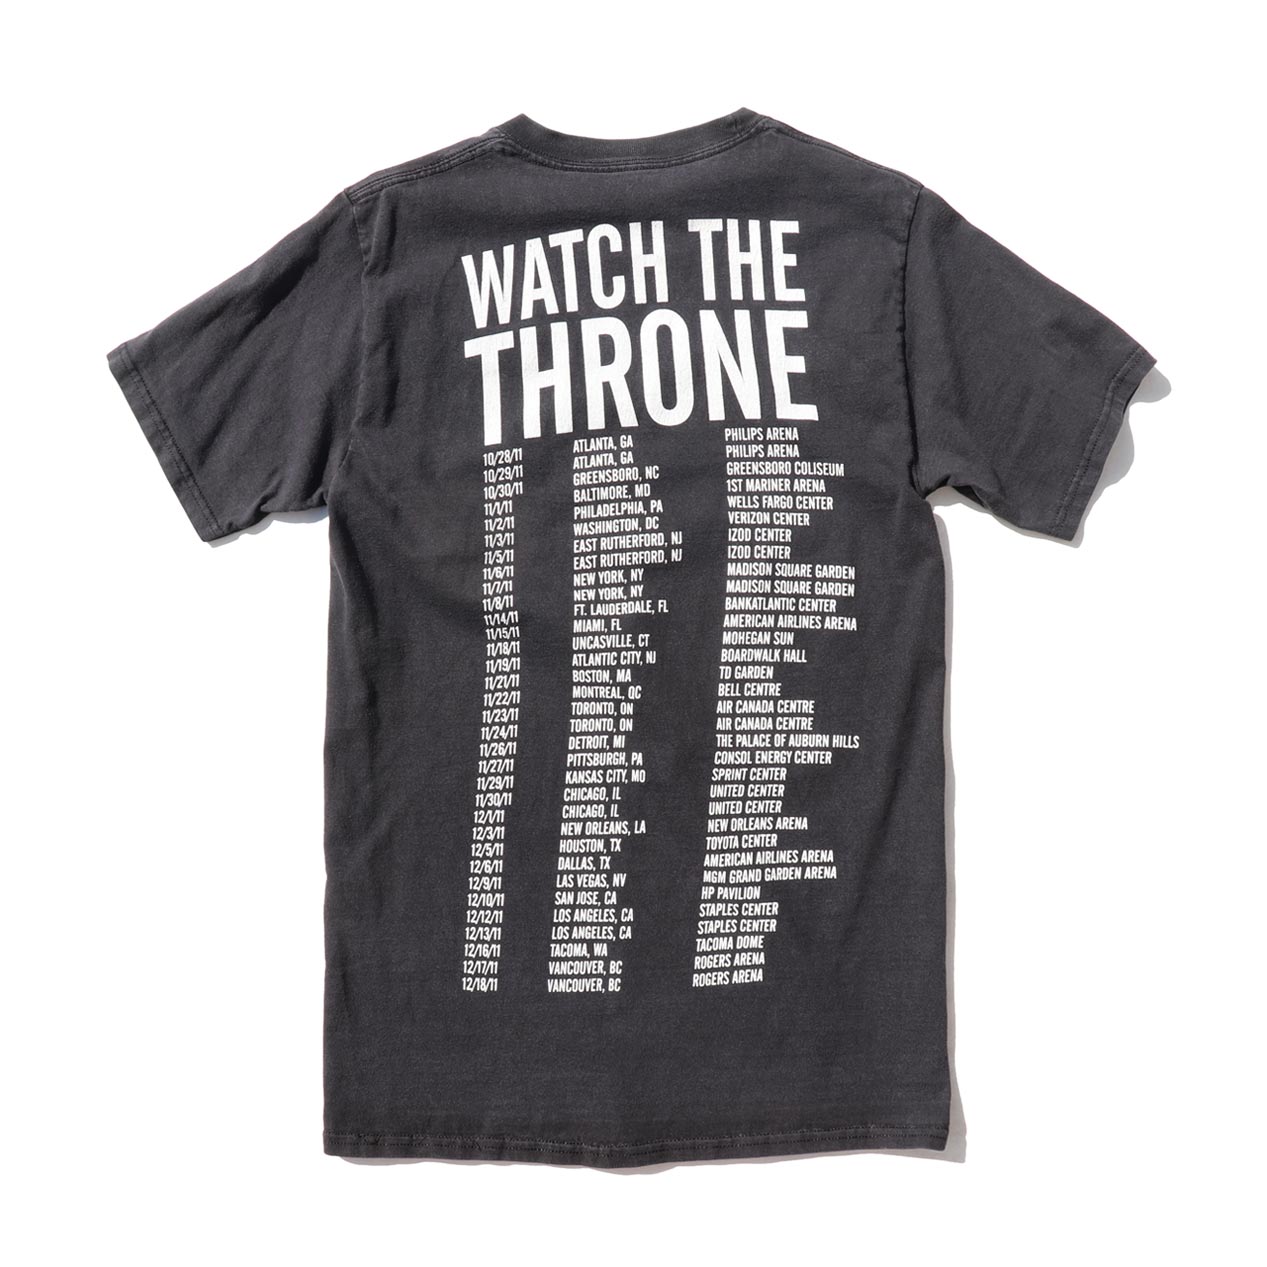 Kanye west jay-z Watch the throne tシャツ